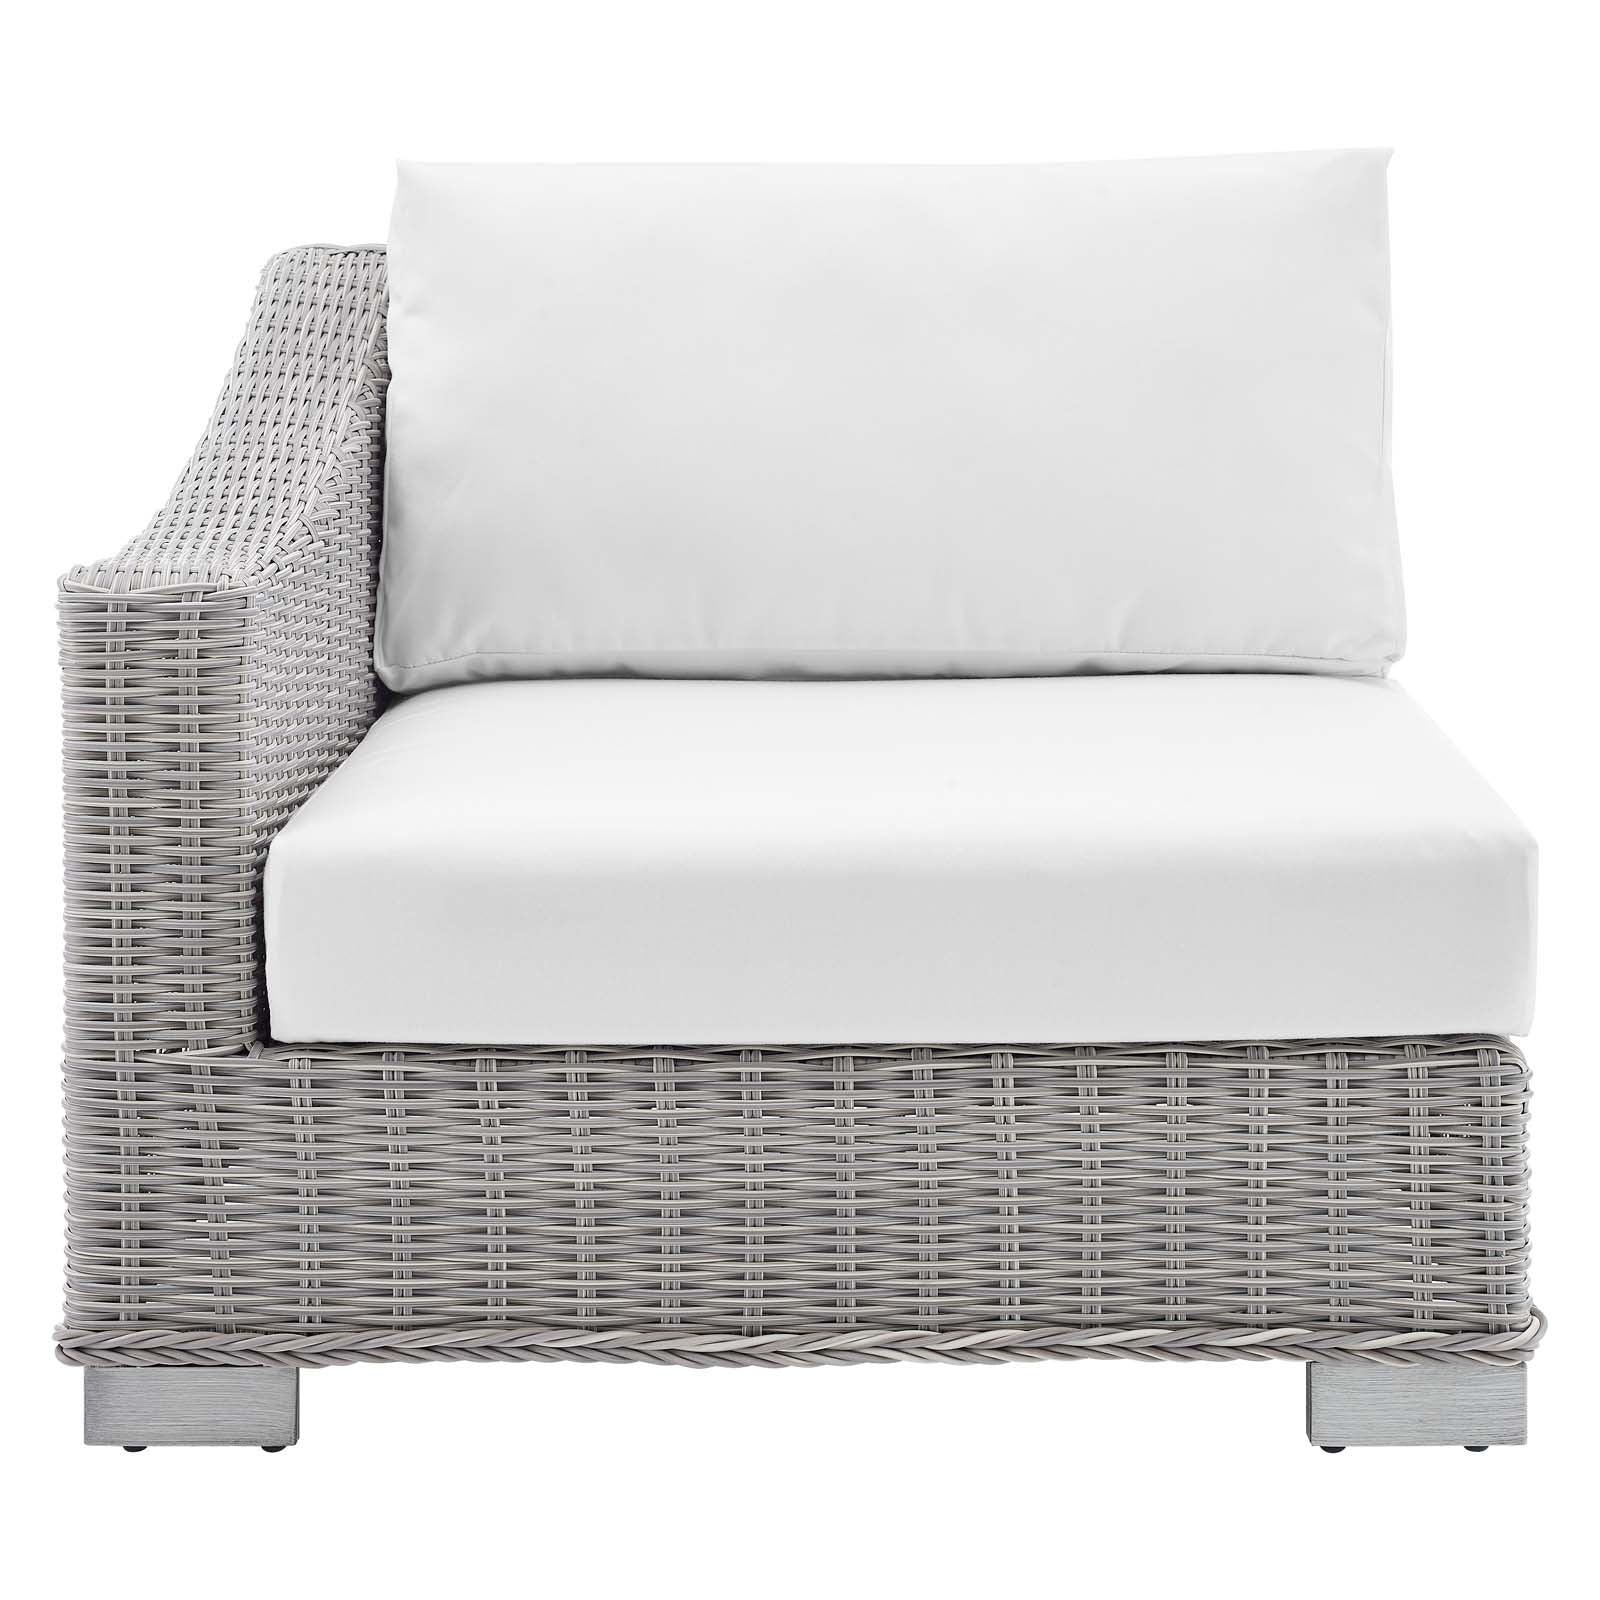 Modway Outdoor Chairs - Conway Sunbrella Outdoor Patio Wicker Rattan Left-Arm Chair Light Gray White